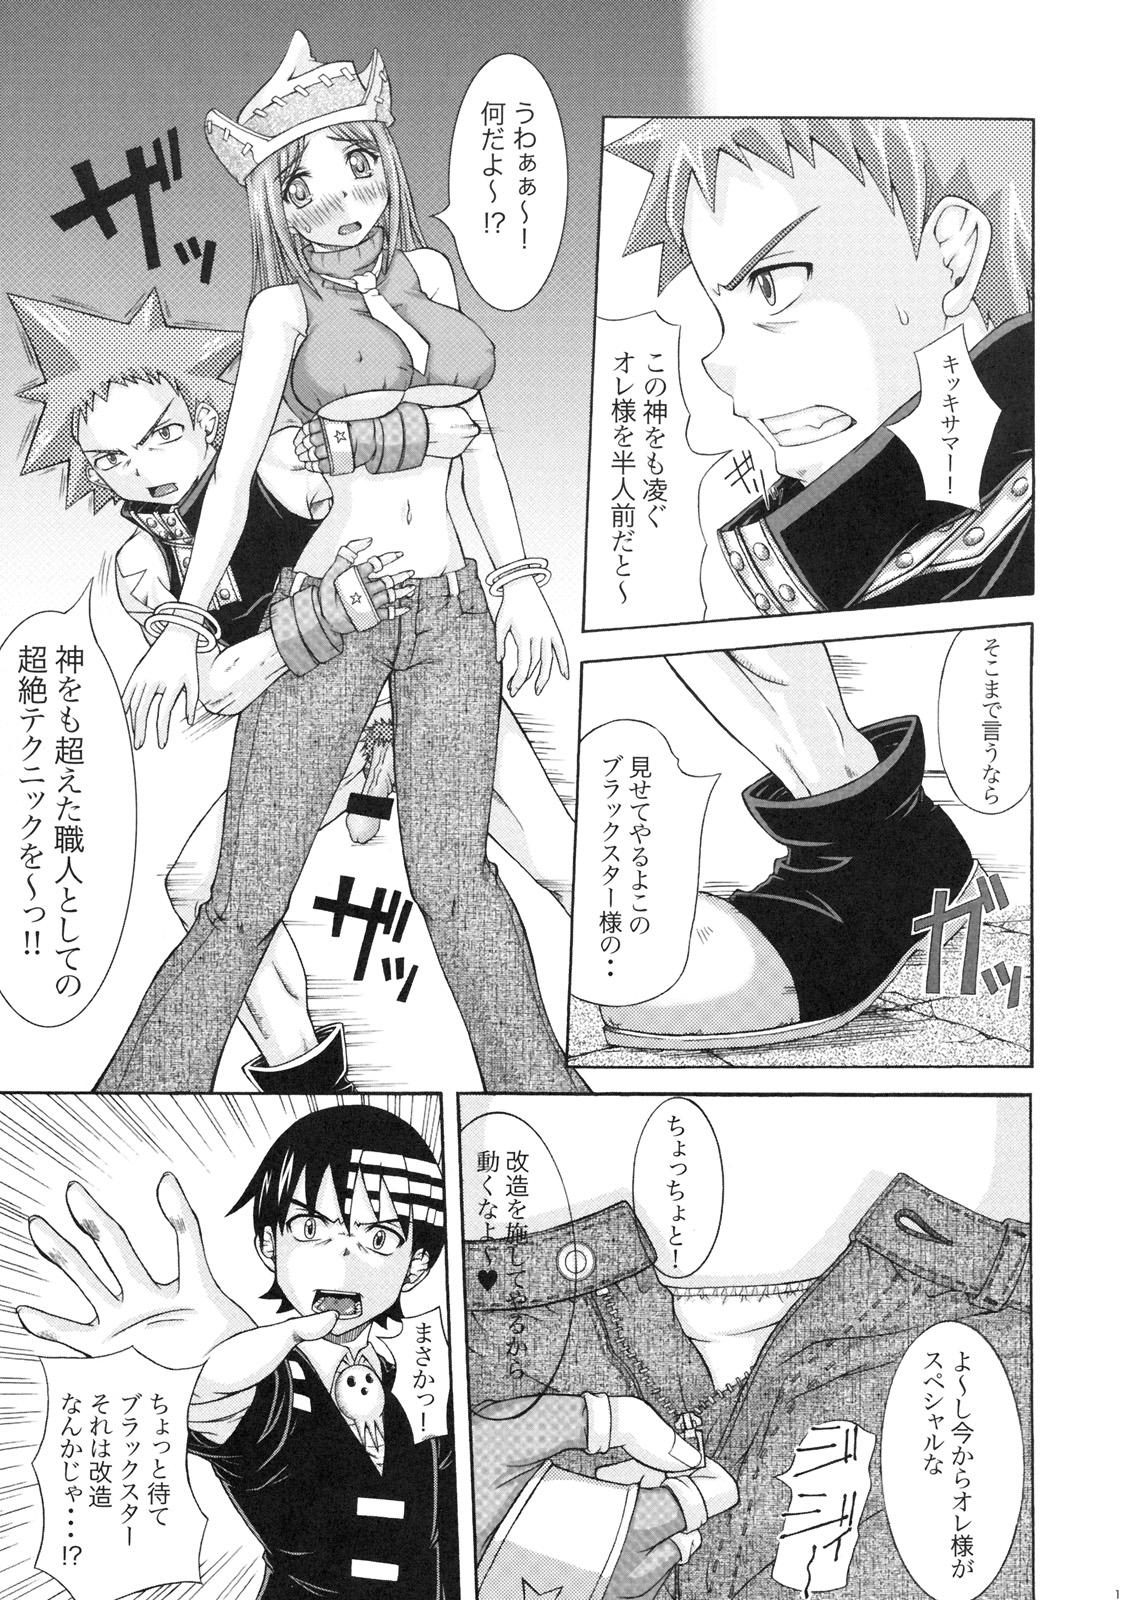 Teensex RABI×2 3rd - Queens blade Soul eater Calle - Page 10